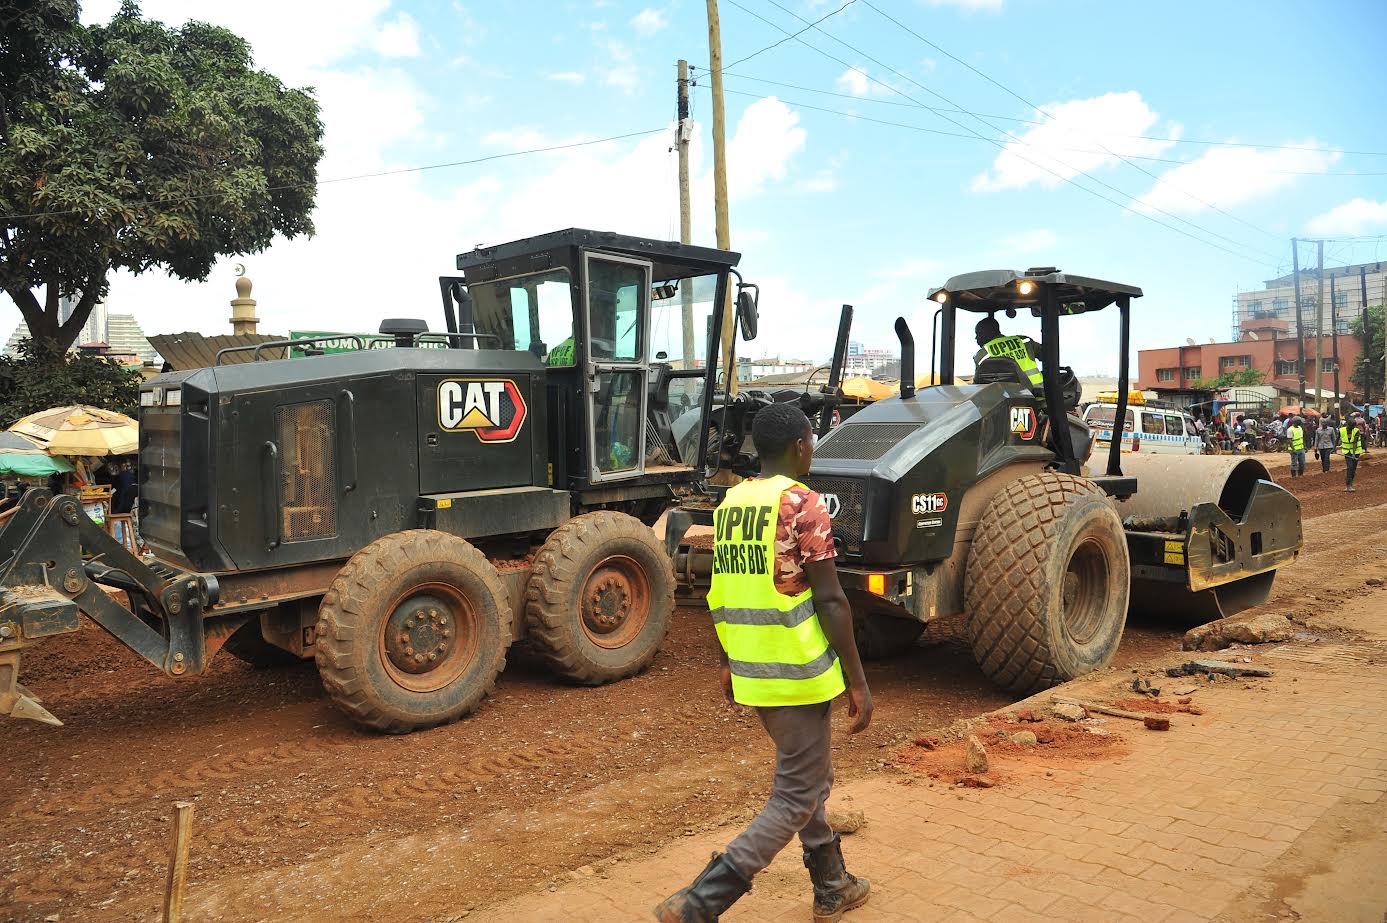 SFC to spend shs2bn on city roadworks, promises quality work in record time